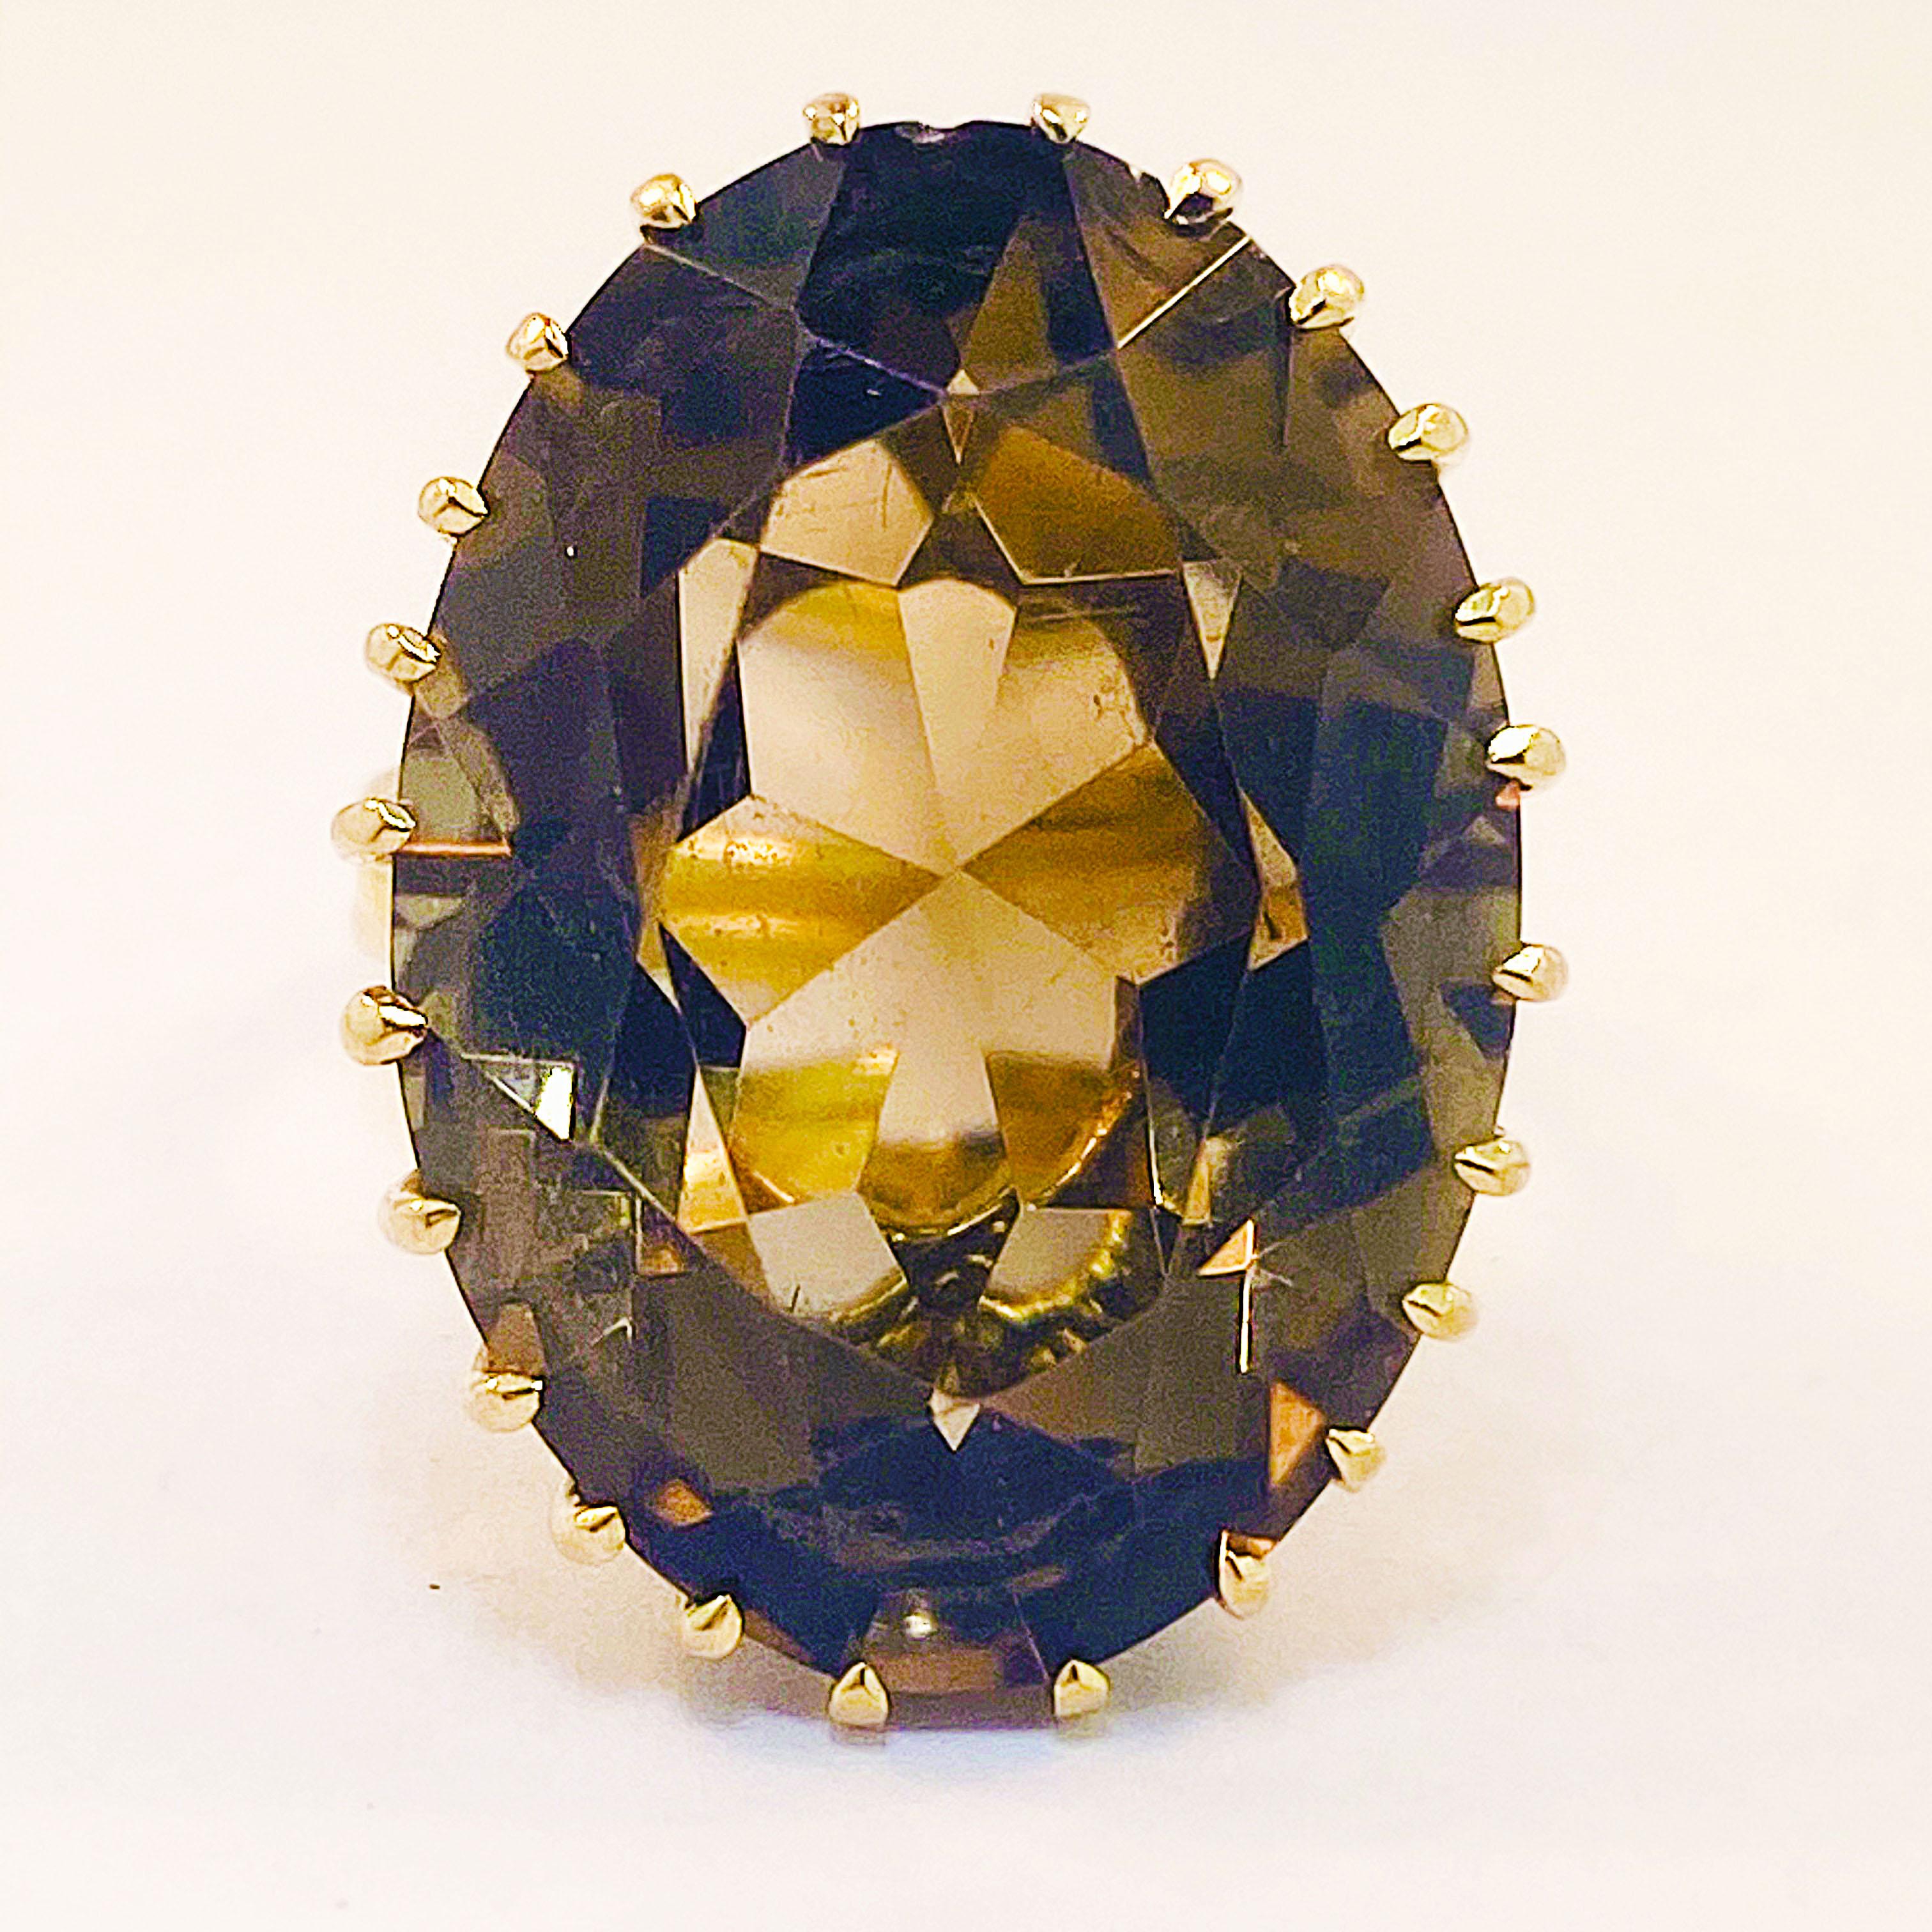 The gorgeous antique designed ring is a custom, one of a kind fine jewelry piece. The ring has a stunning, multi-prong ring setting with 24 pointed prongs holding the gorgeous, genuine Smokey Quartz gemstone in place. The smokey quartz has an